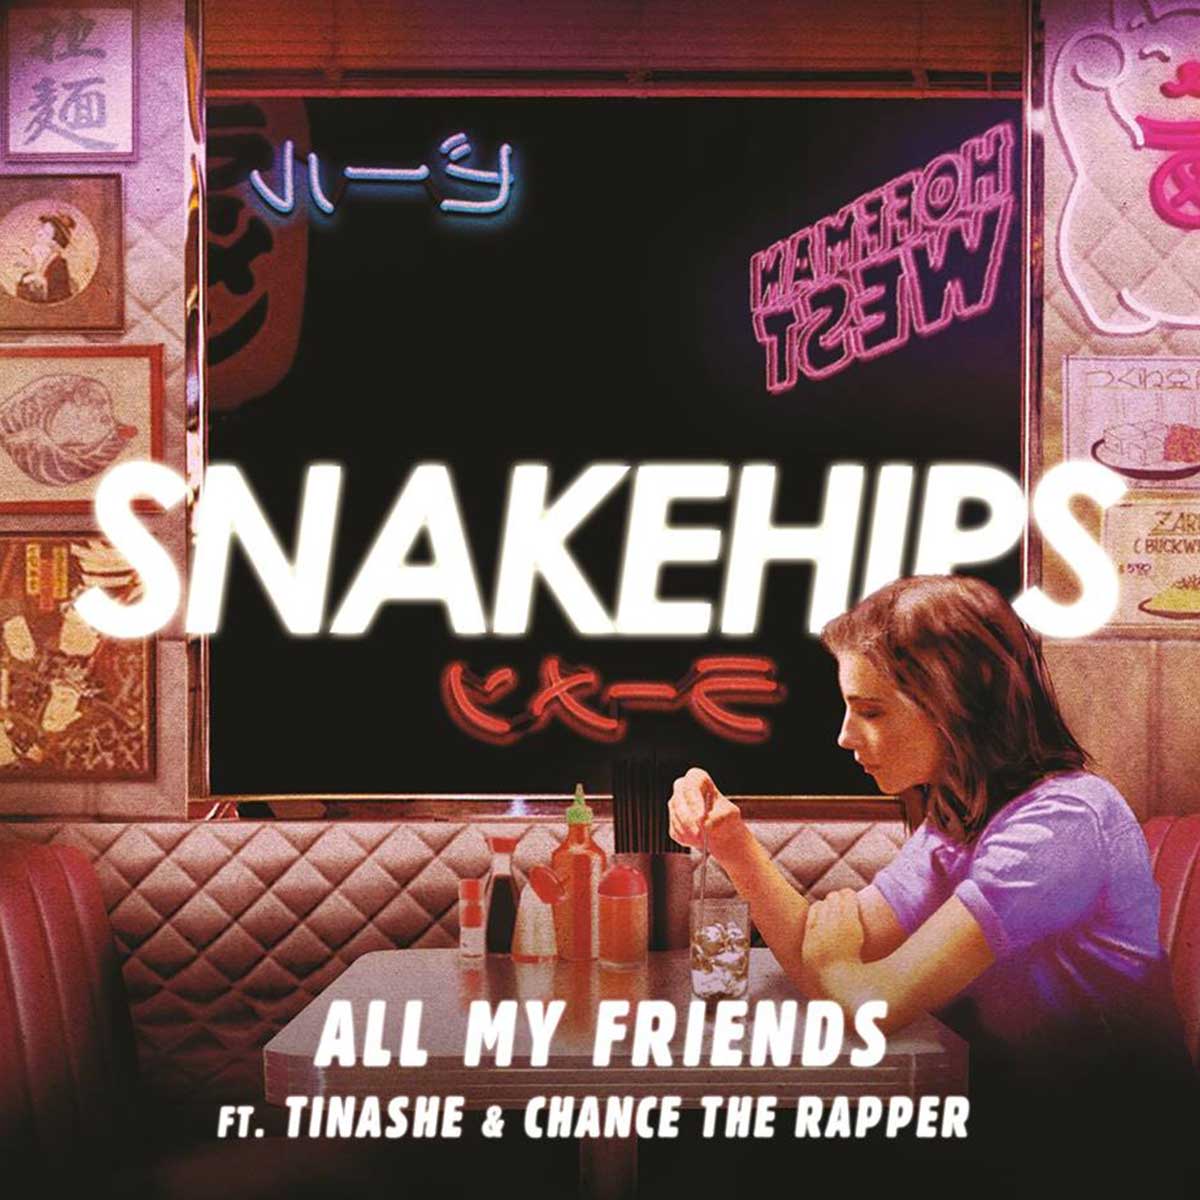 Snakehips interview